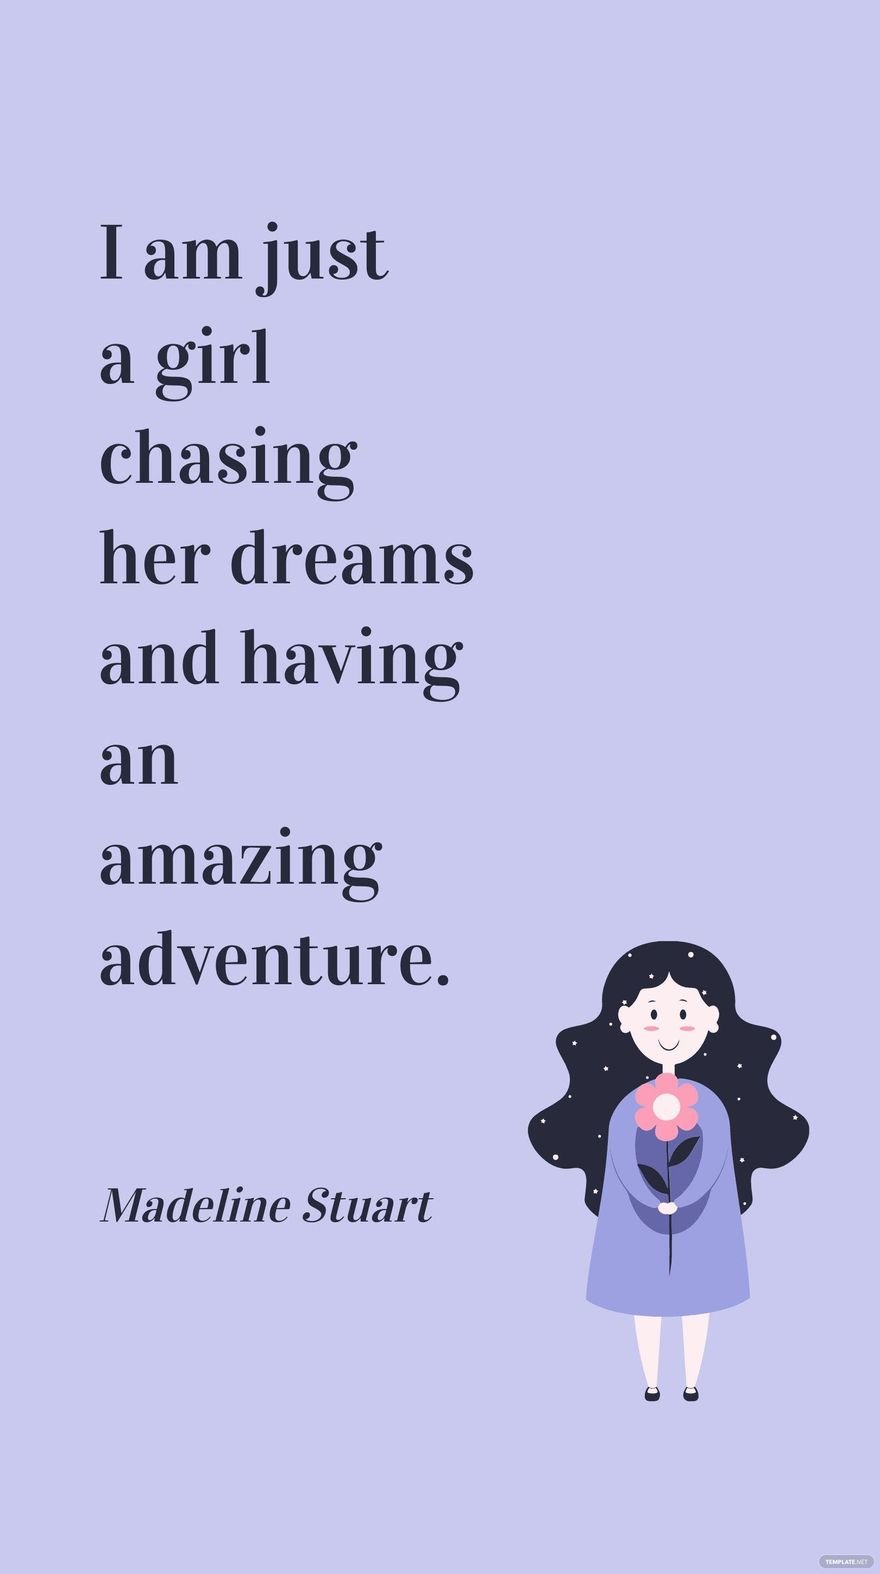 Madeline Stuart - I am just a girl chasing her dreams and having an amazing adventure.